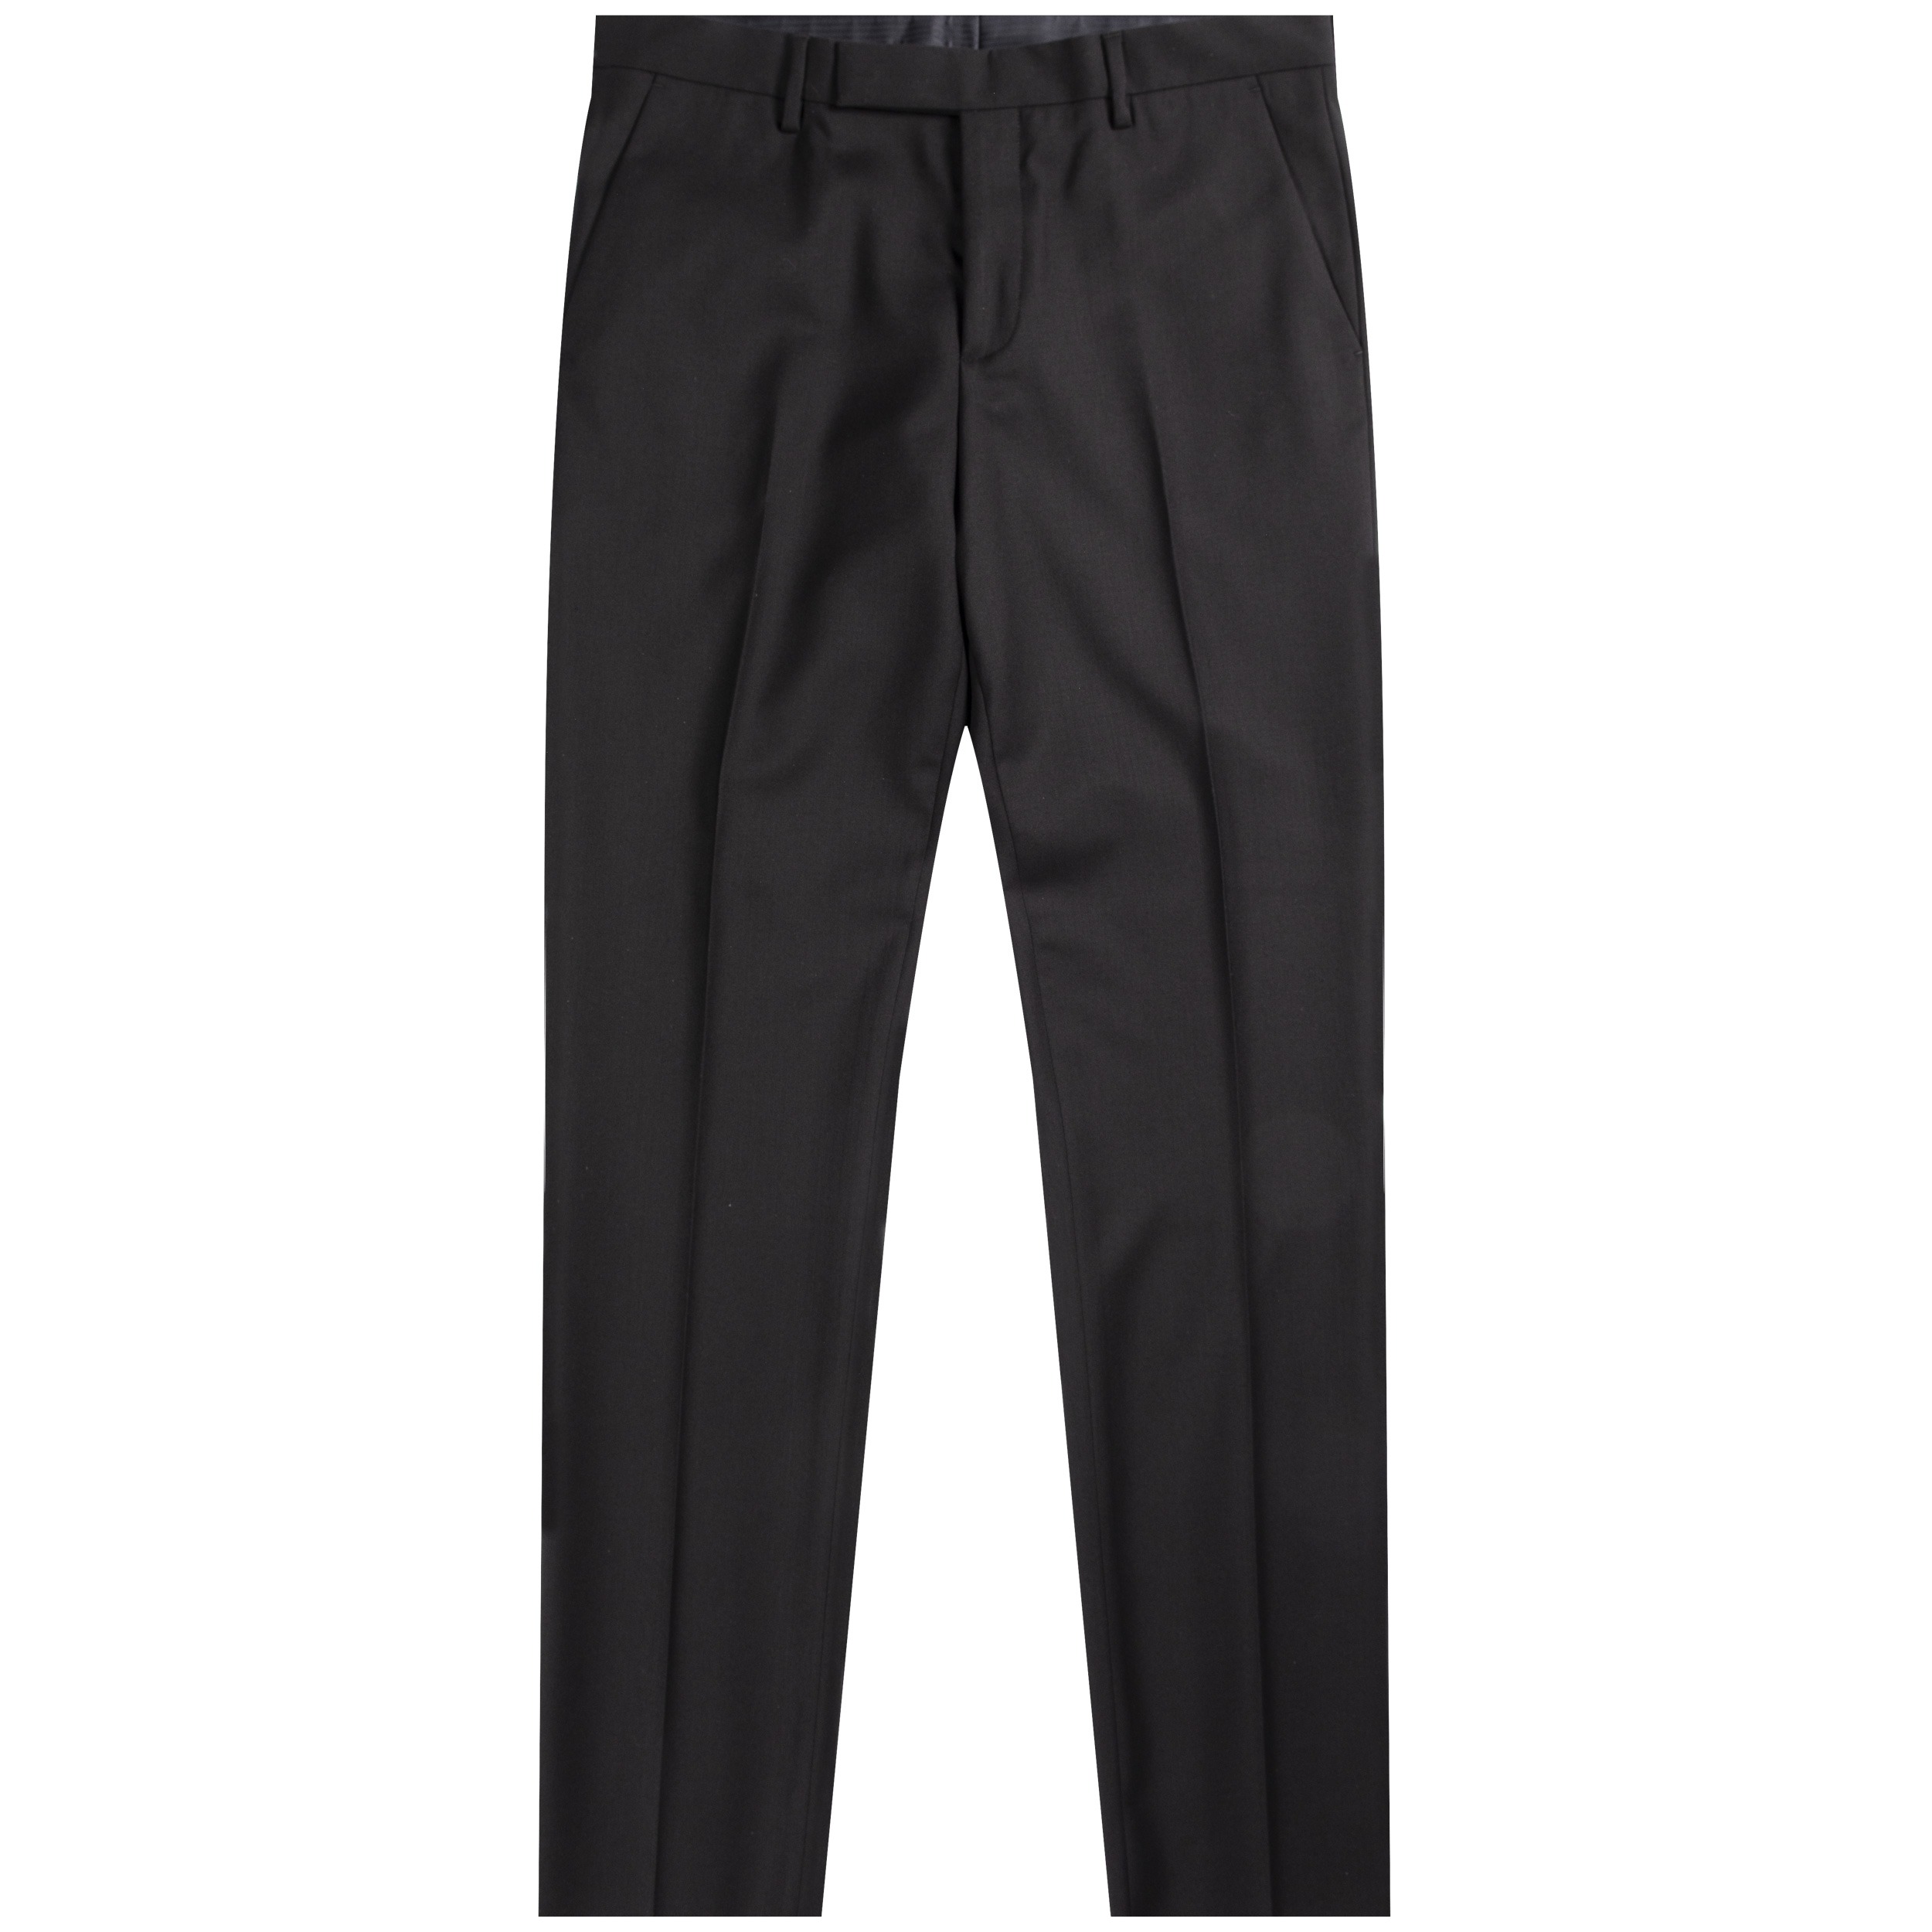 Paul Smith ’A Suit To Travel In’ Slim Fit Trouser Black